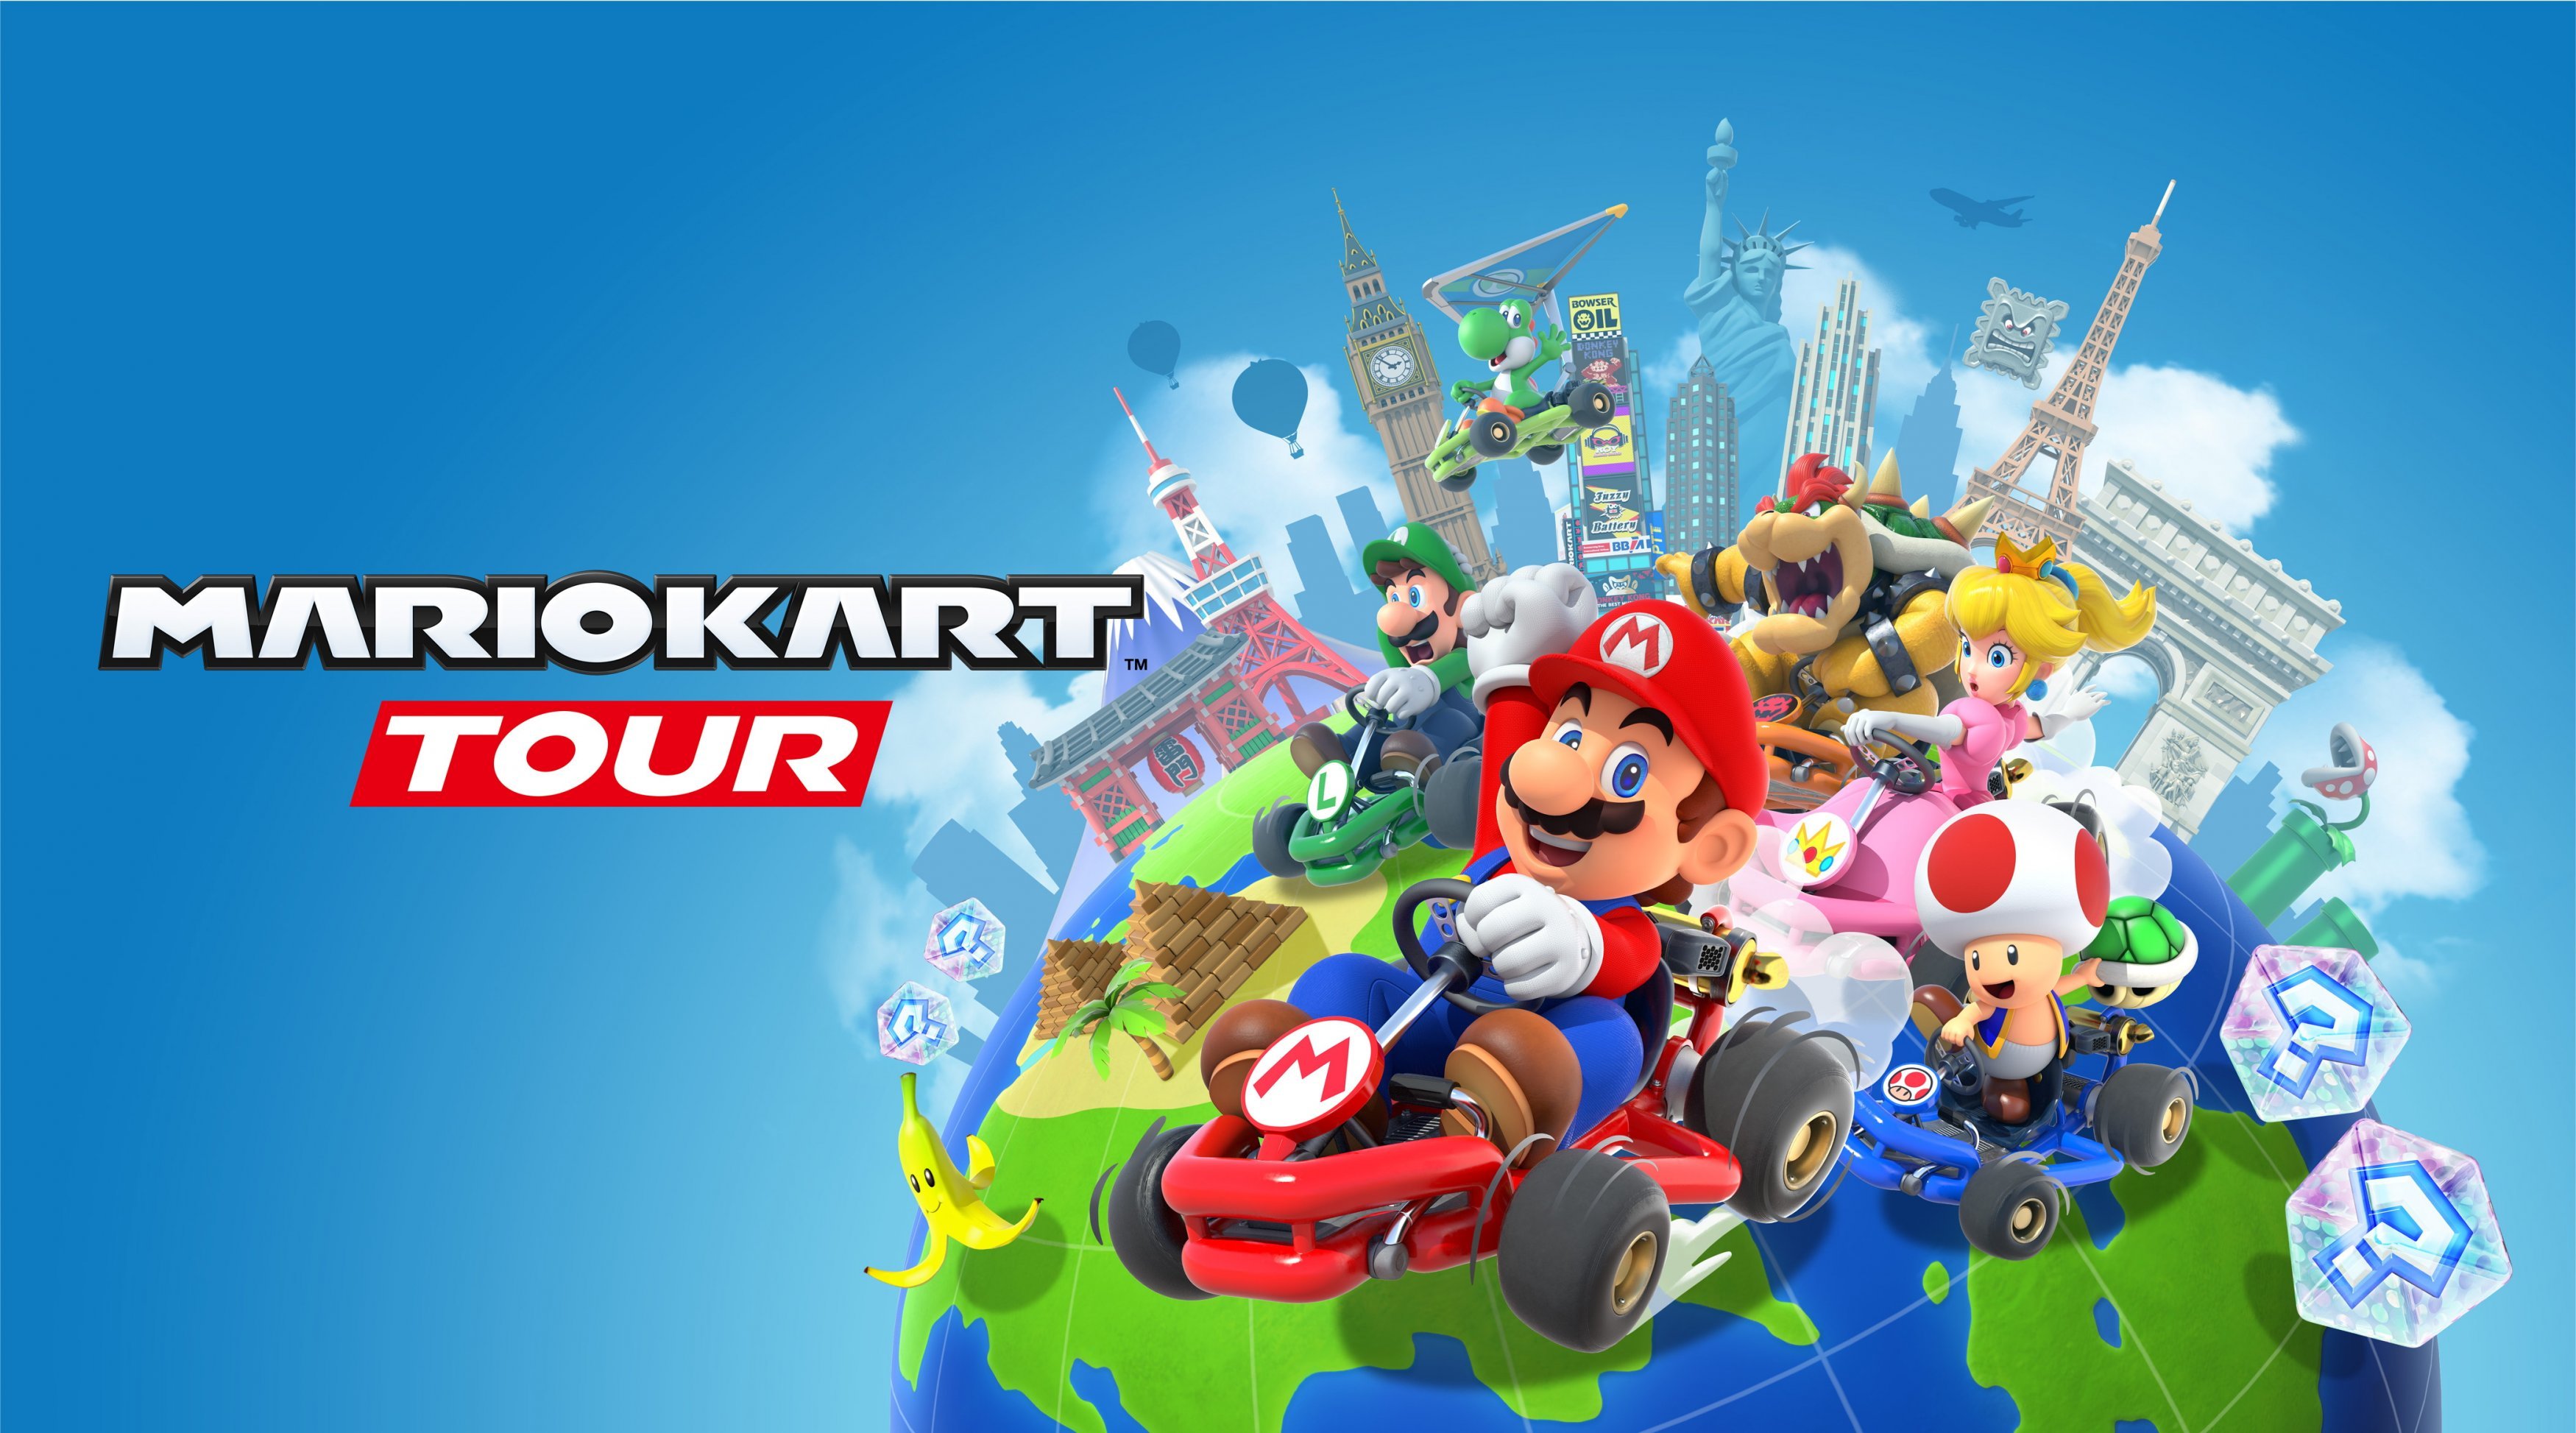 Mario Kart Tour powers up with multiplayer and a monthly sub | GBAtemp.net  - The Independent Video Game Community